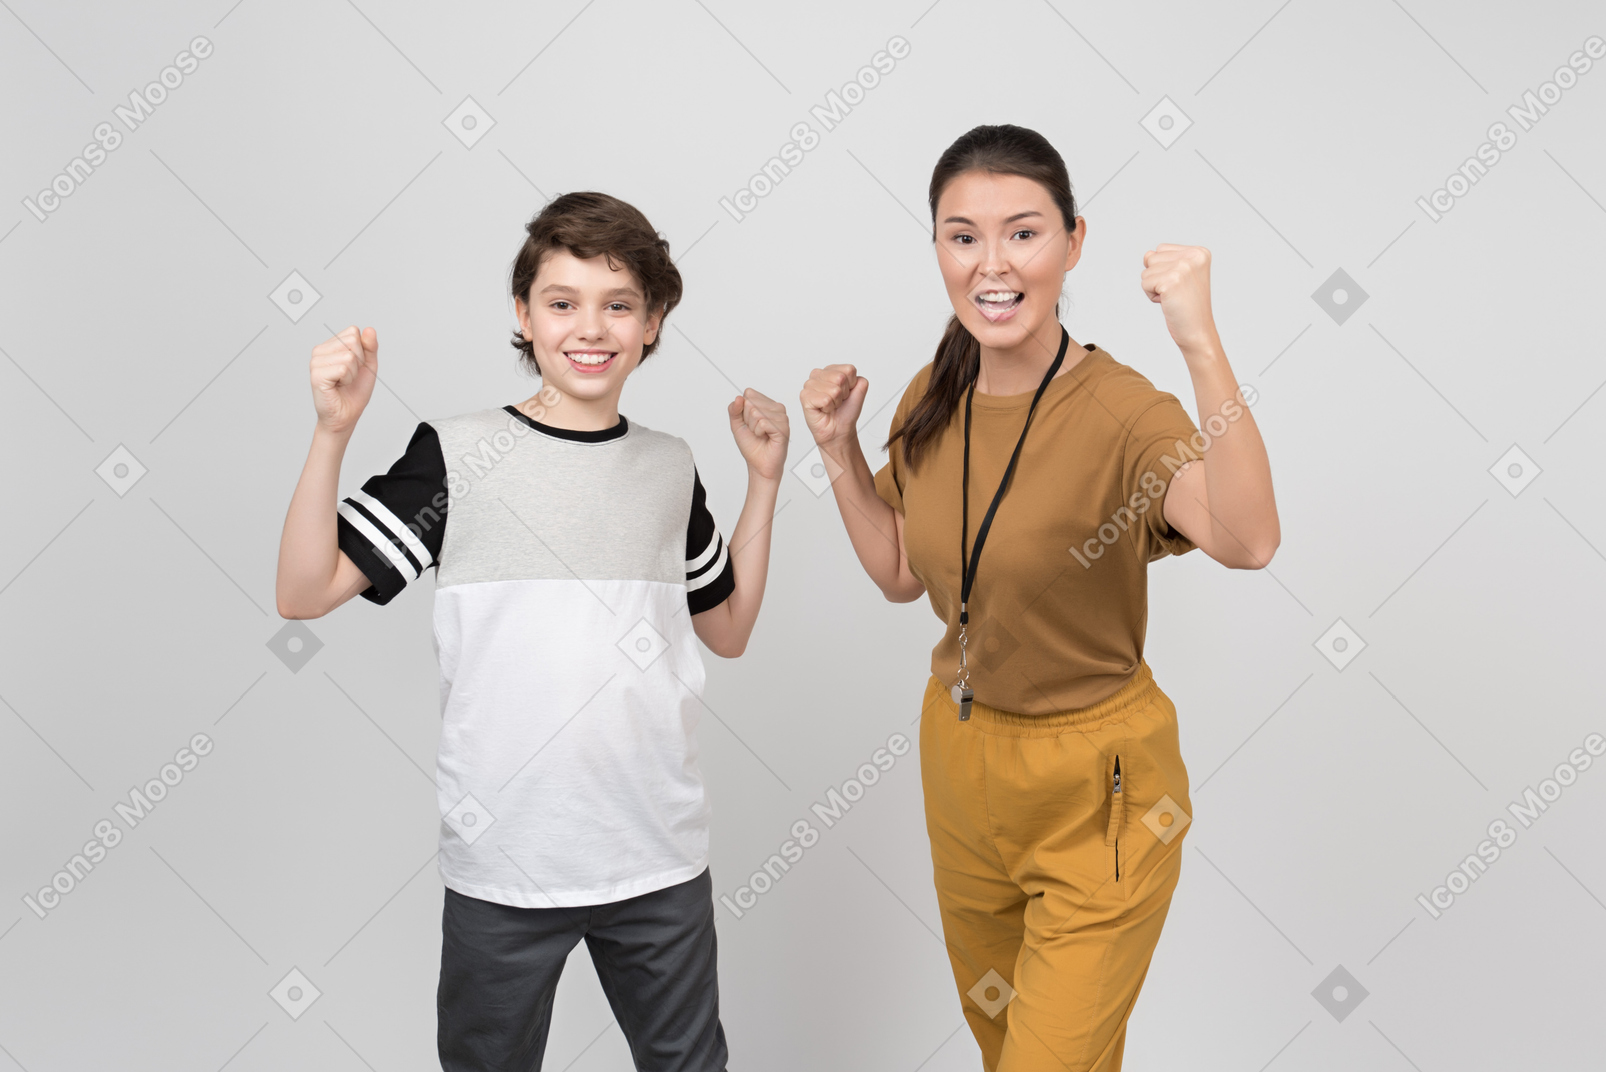 Pe teacher and pupil clenching their fists and feeling powerful